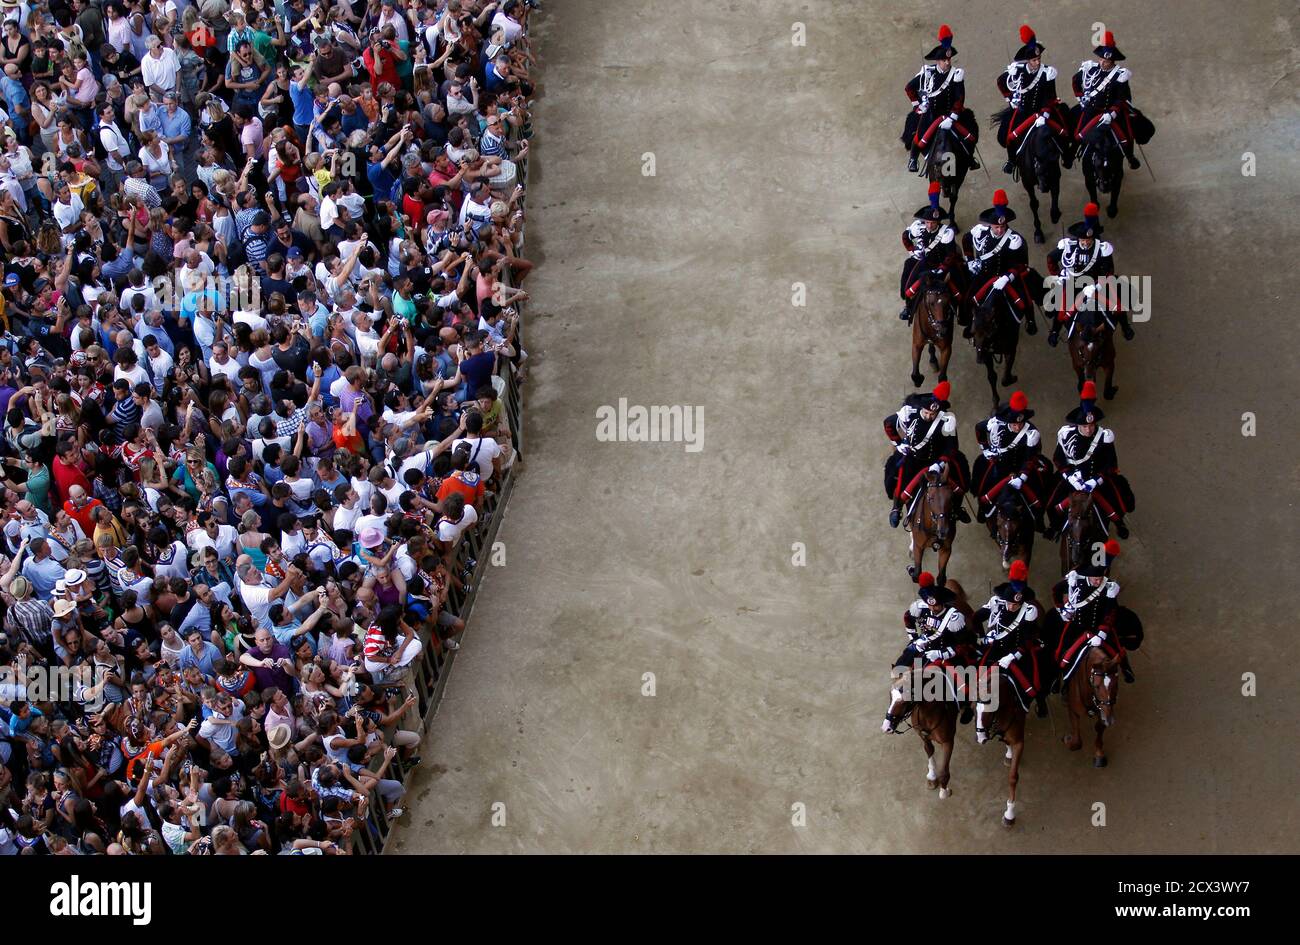 Italian Carabinieri police arrive during their parade prior to a training session of the Palio race in Siena's main square August 15, 2012. Every year on August 16, almost without fail since the mid-1600s, 10 riders compete bareback around Siena's shell-shaped central square in a bid to win the Palio, a silk banner depicting the Madonna and child. REUTERS/Alessandro Bianchi (ITALY - Tags: SOCIETY ANIMALS SPORT HORSE RACING) Stock Photo